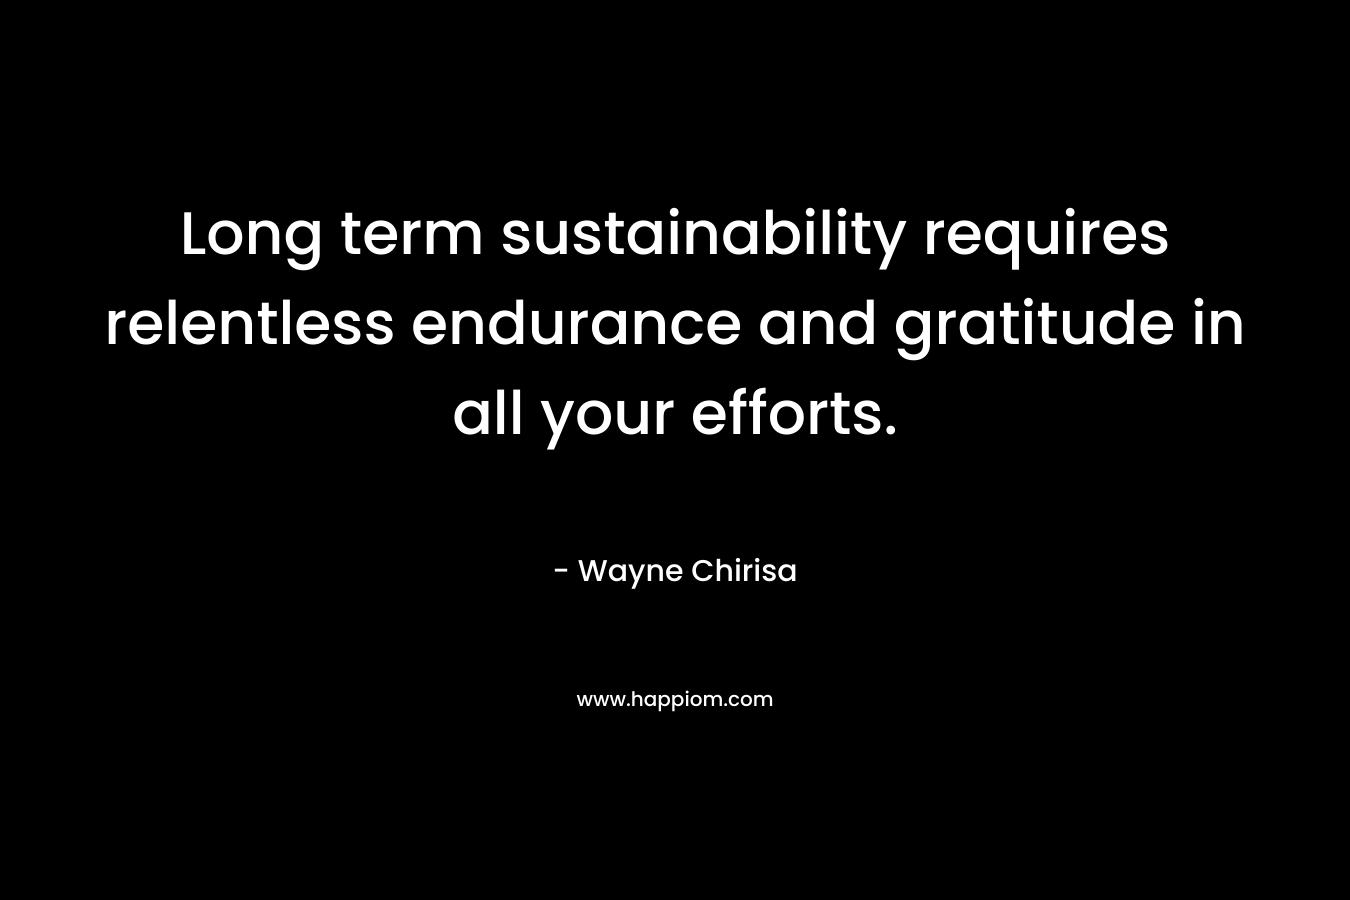 Long term sustainability requires relentless endurance and gratitude in all your efforts. – Wayne Chirisa